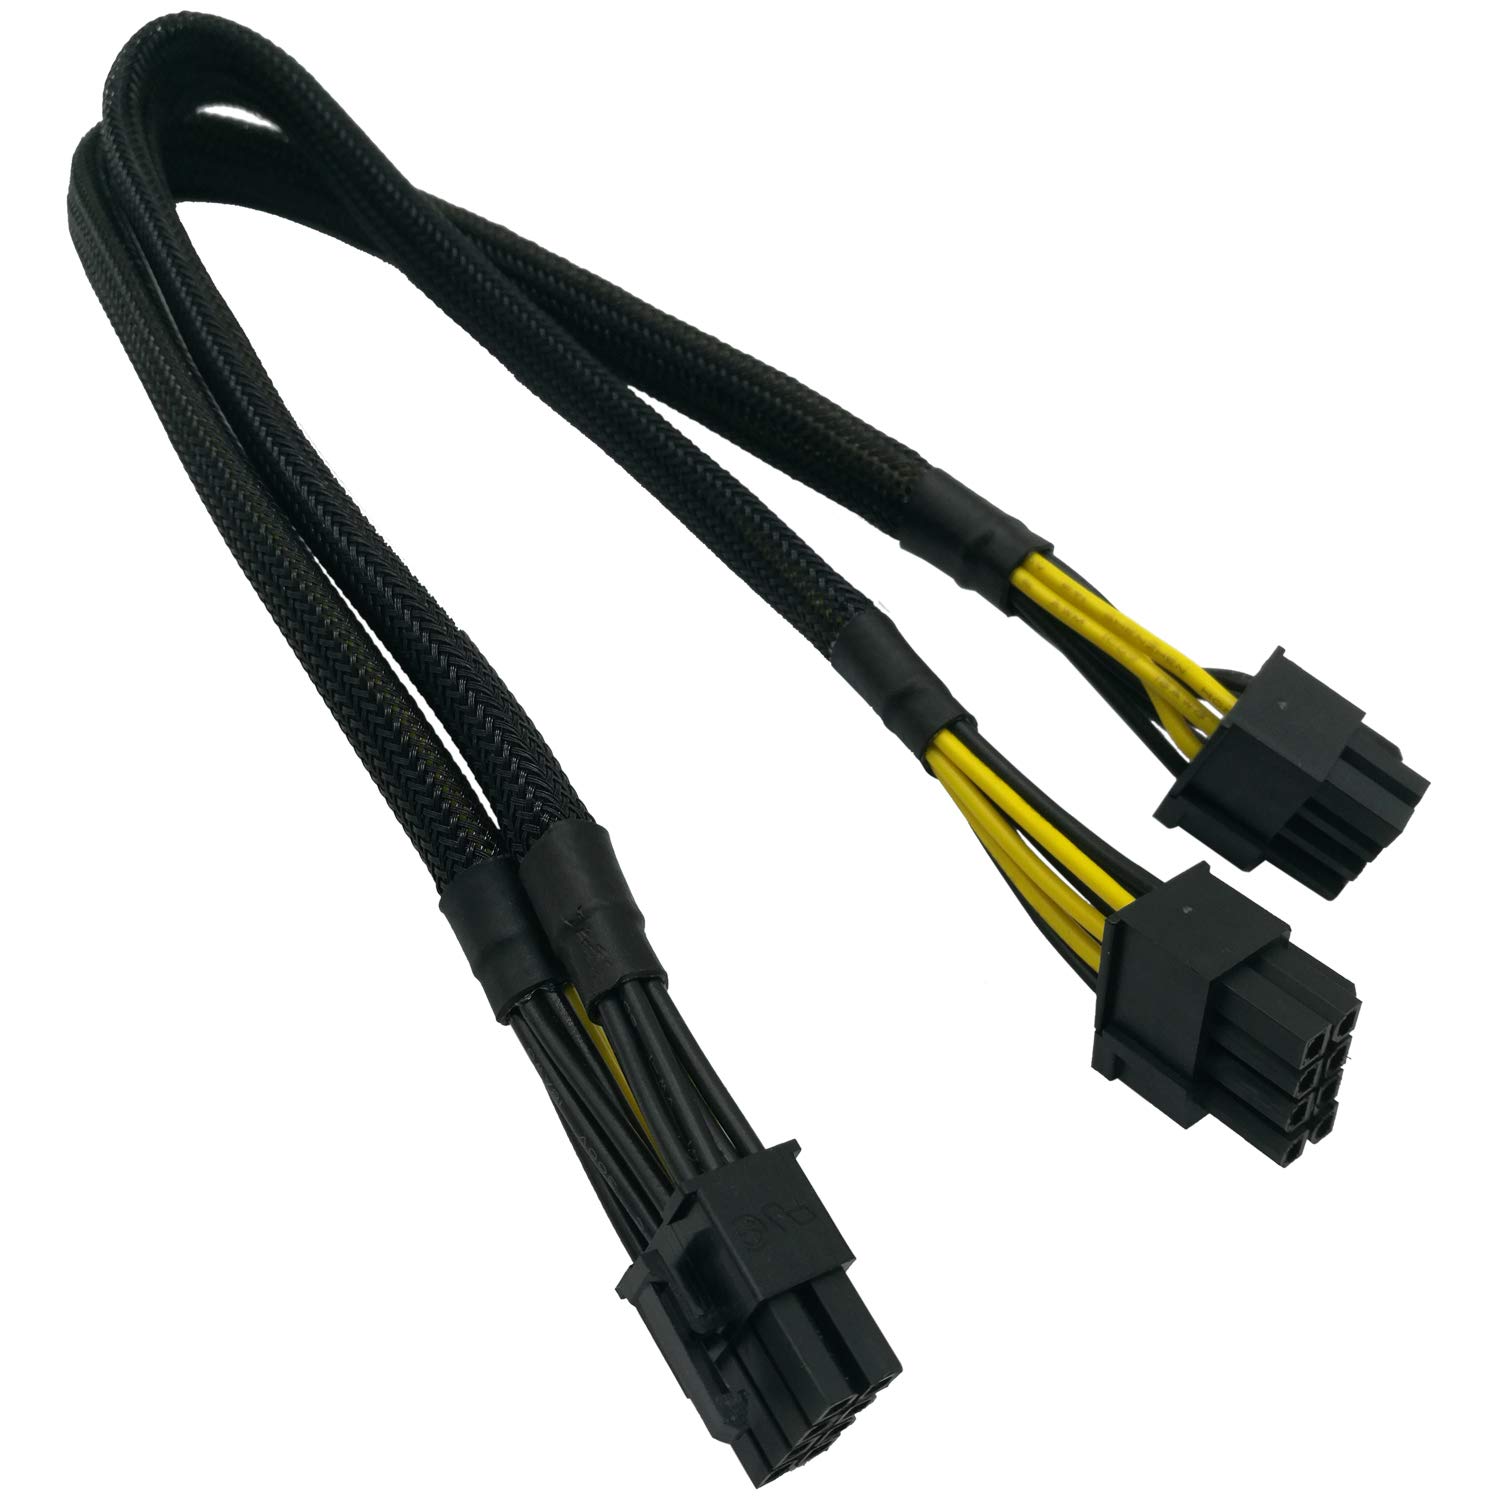 New For Dell PowerEdge R720 R730 R7910 9H6FV N08NH Split GPU Power Adapter Cable 